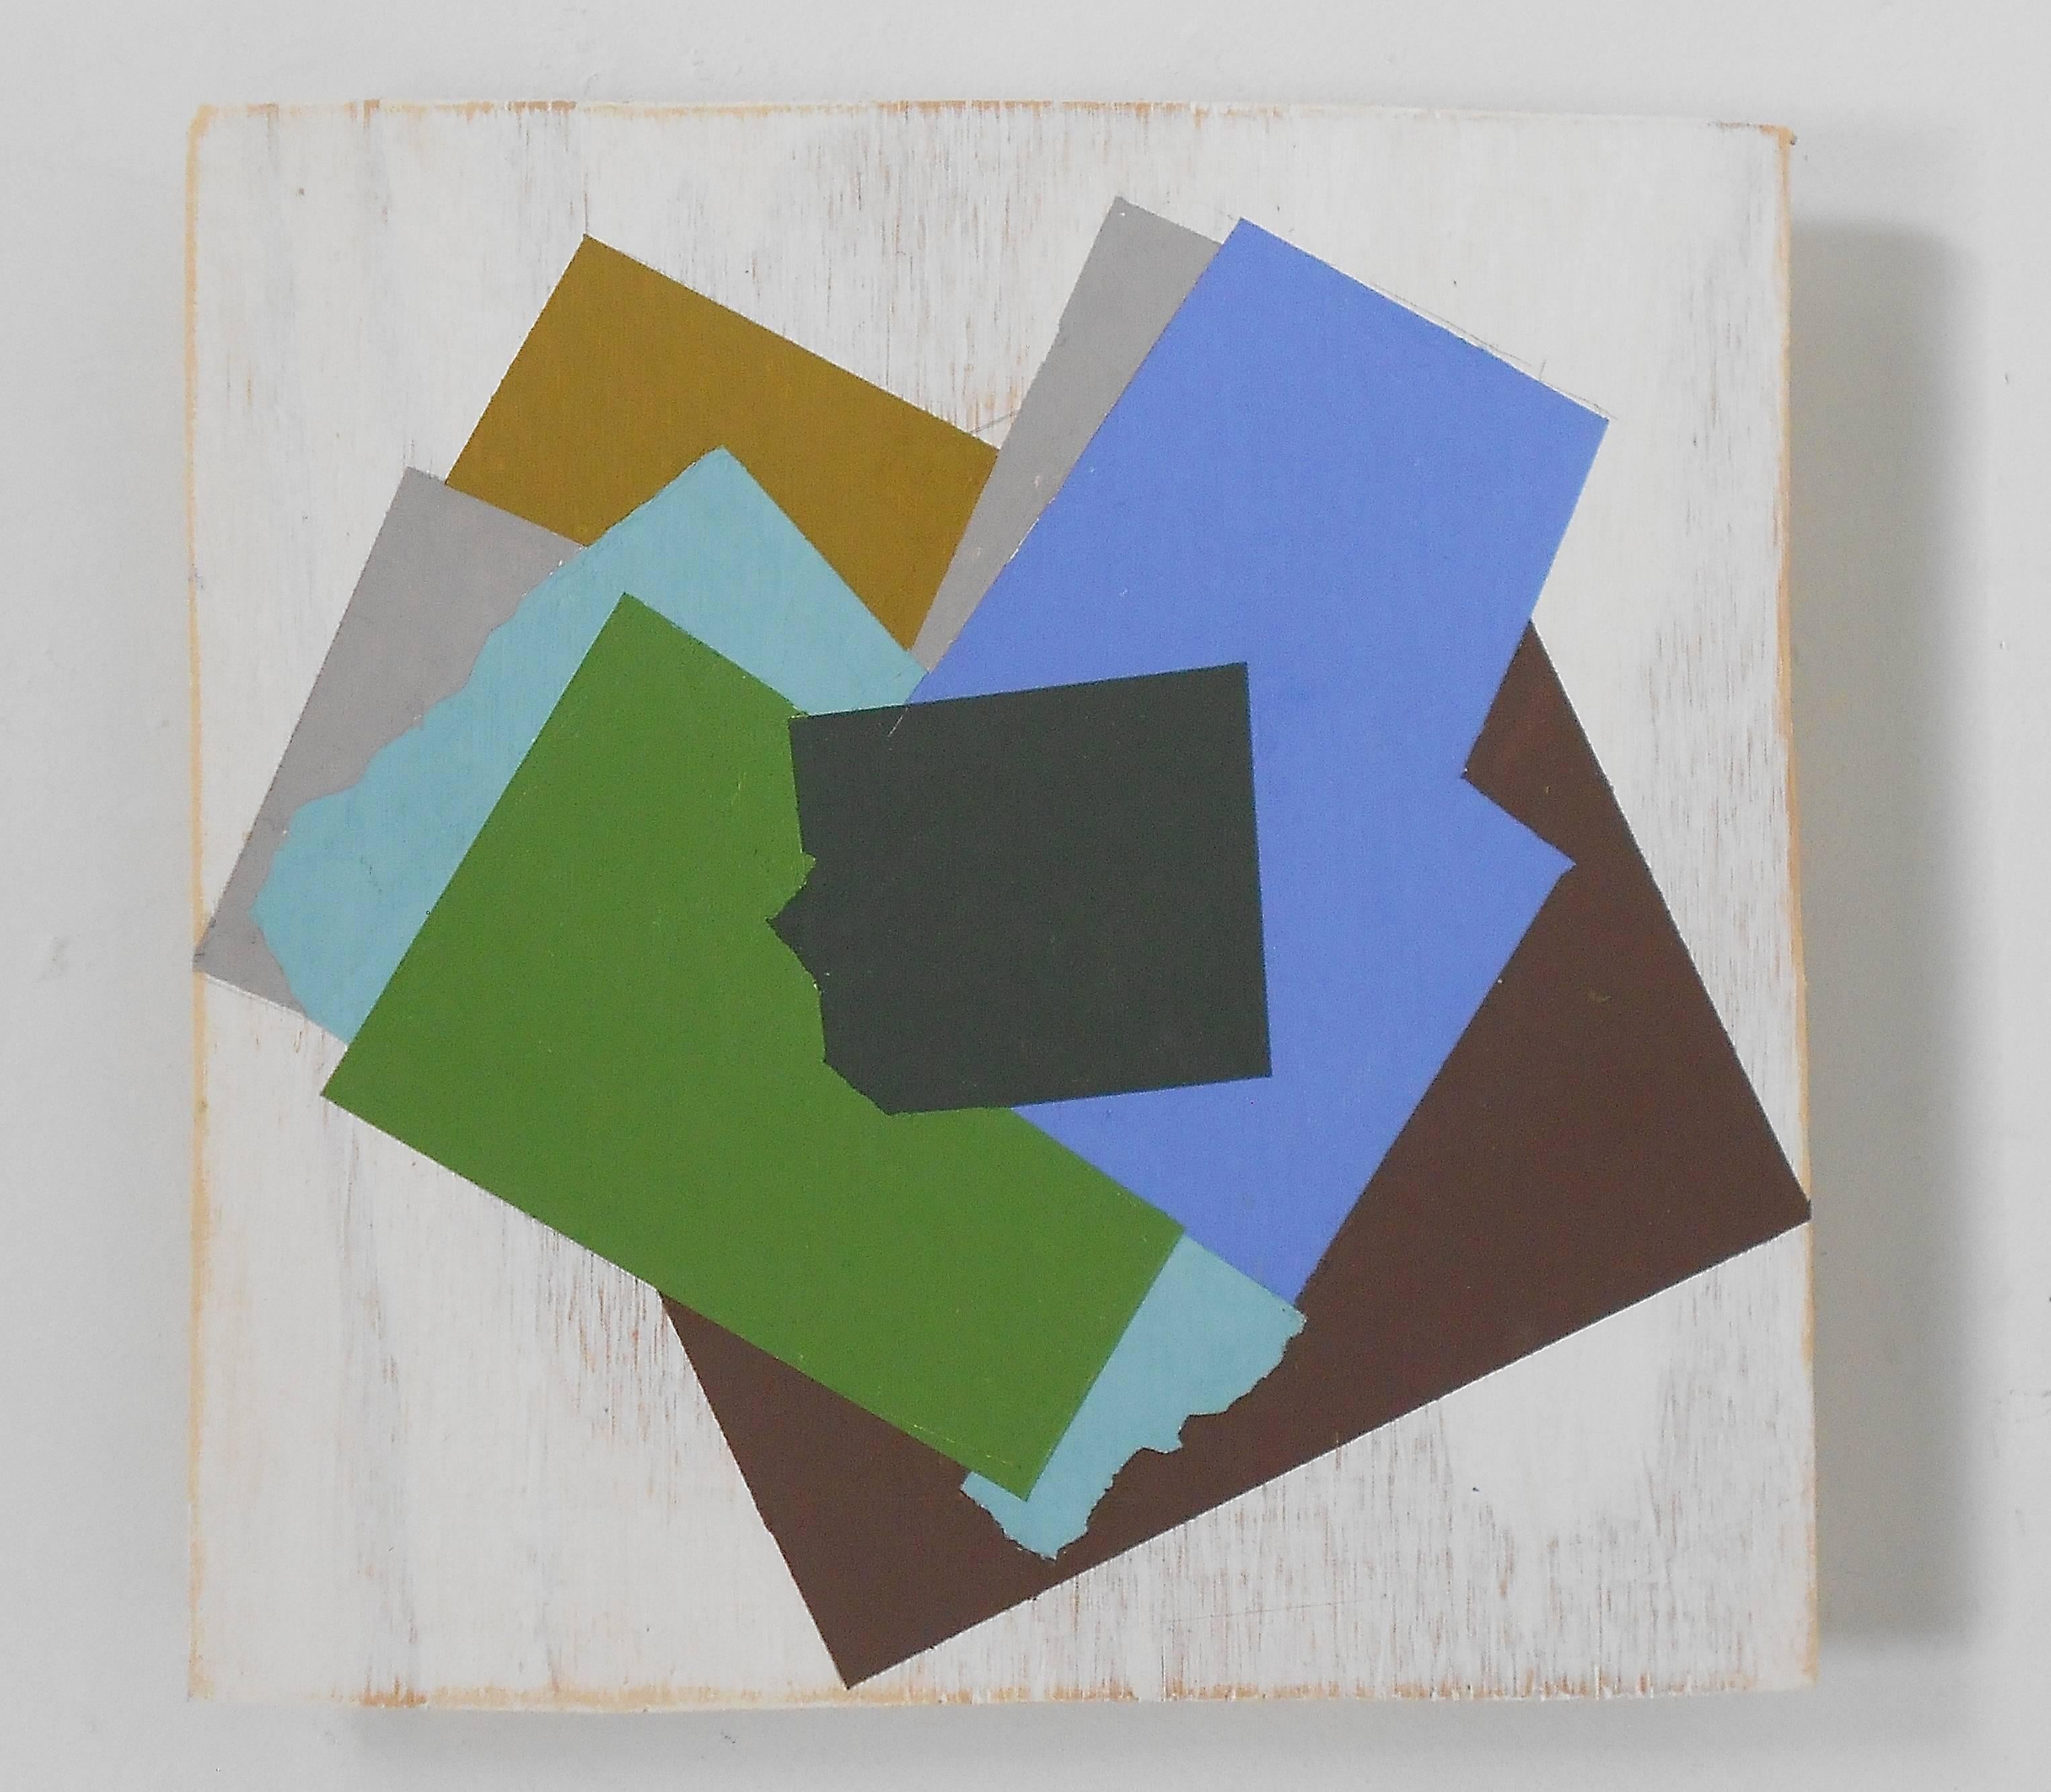 "Untitled" Geometric Abstract Blue Green Brown Mixed Media Oil on Wood